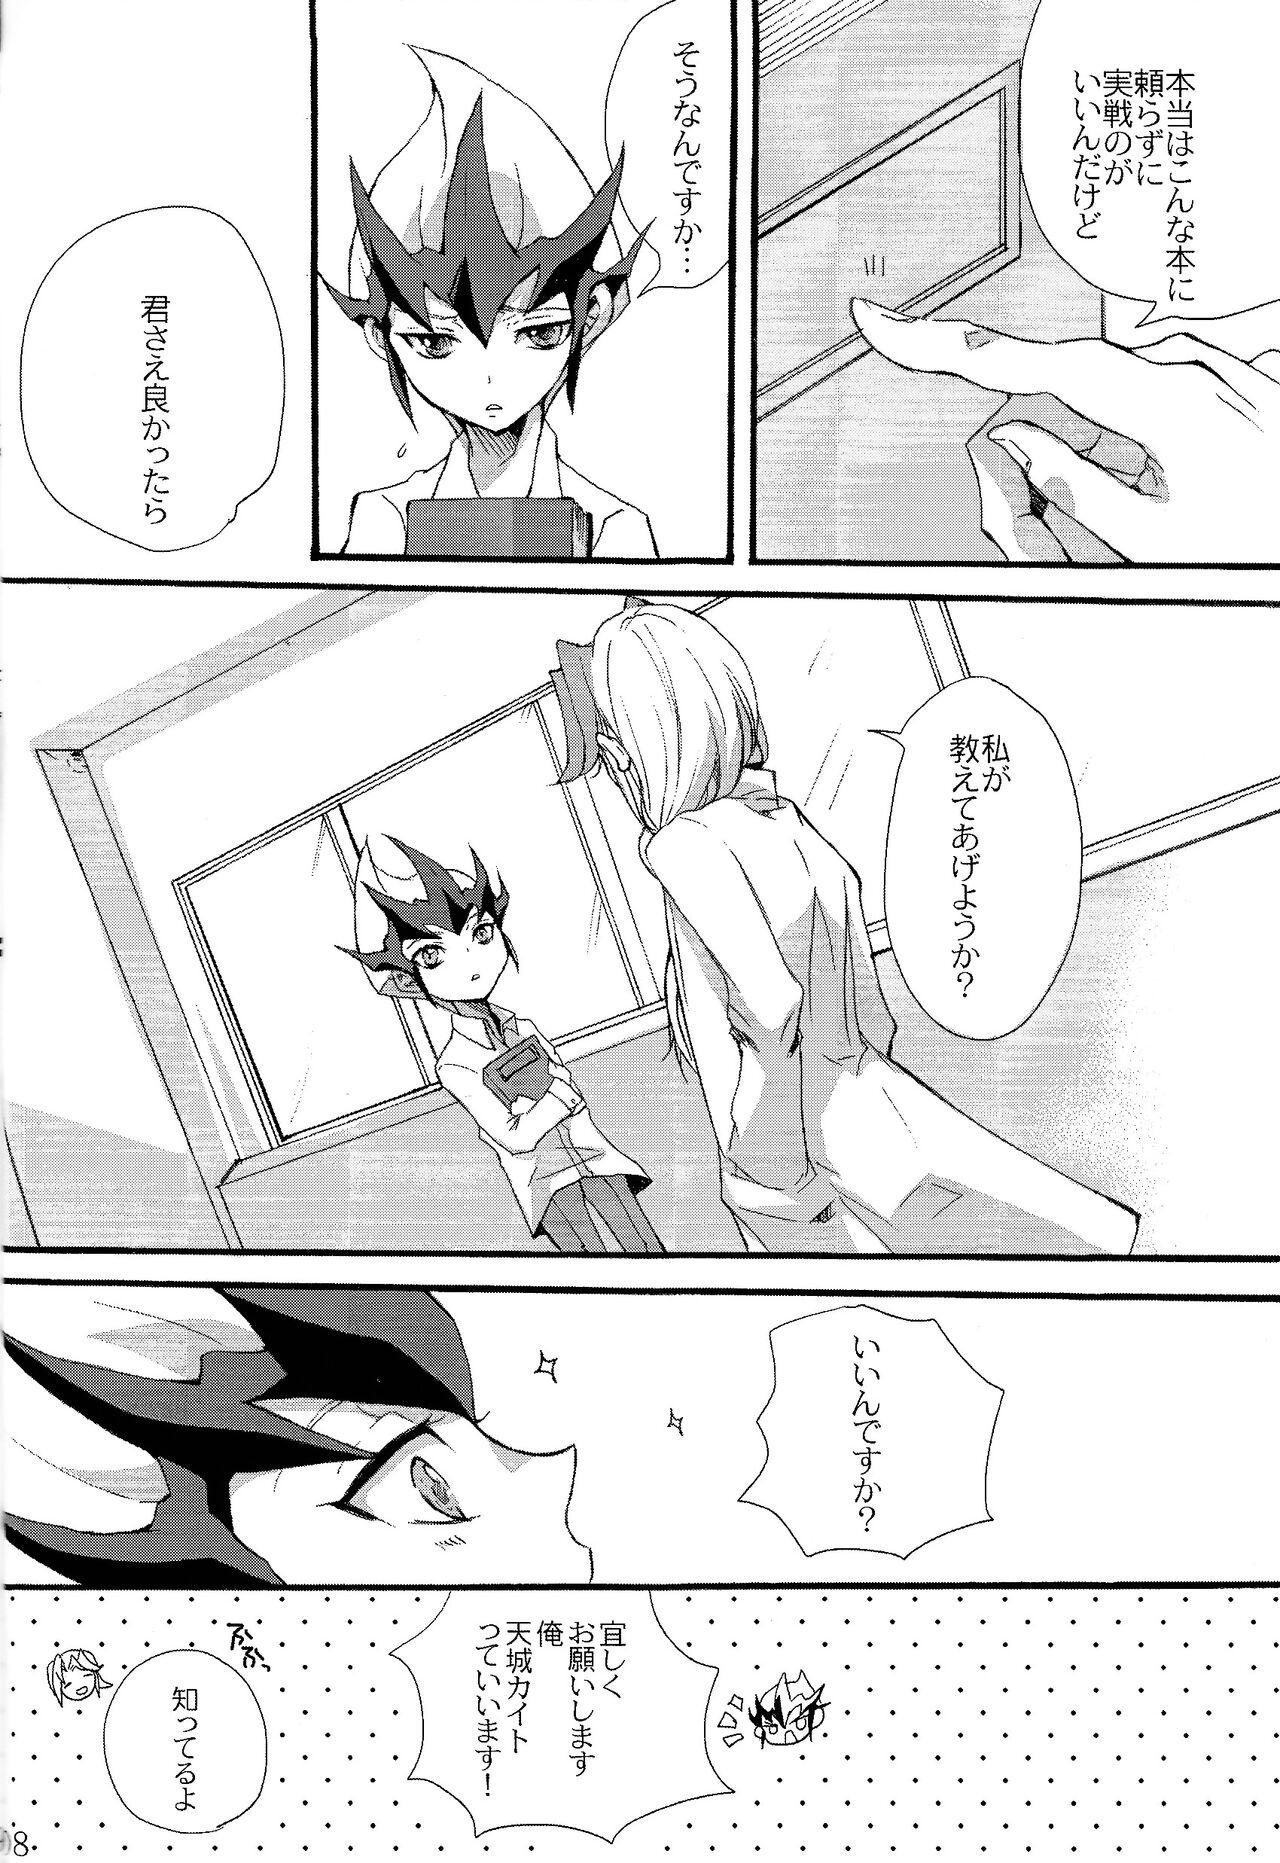 Ass until the blouse is buttoned up - Yu-gi-oh zexal Dick Sucking - Page 7